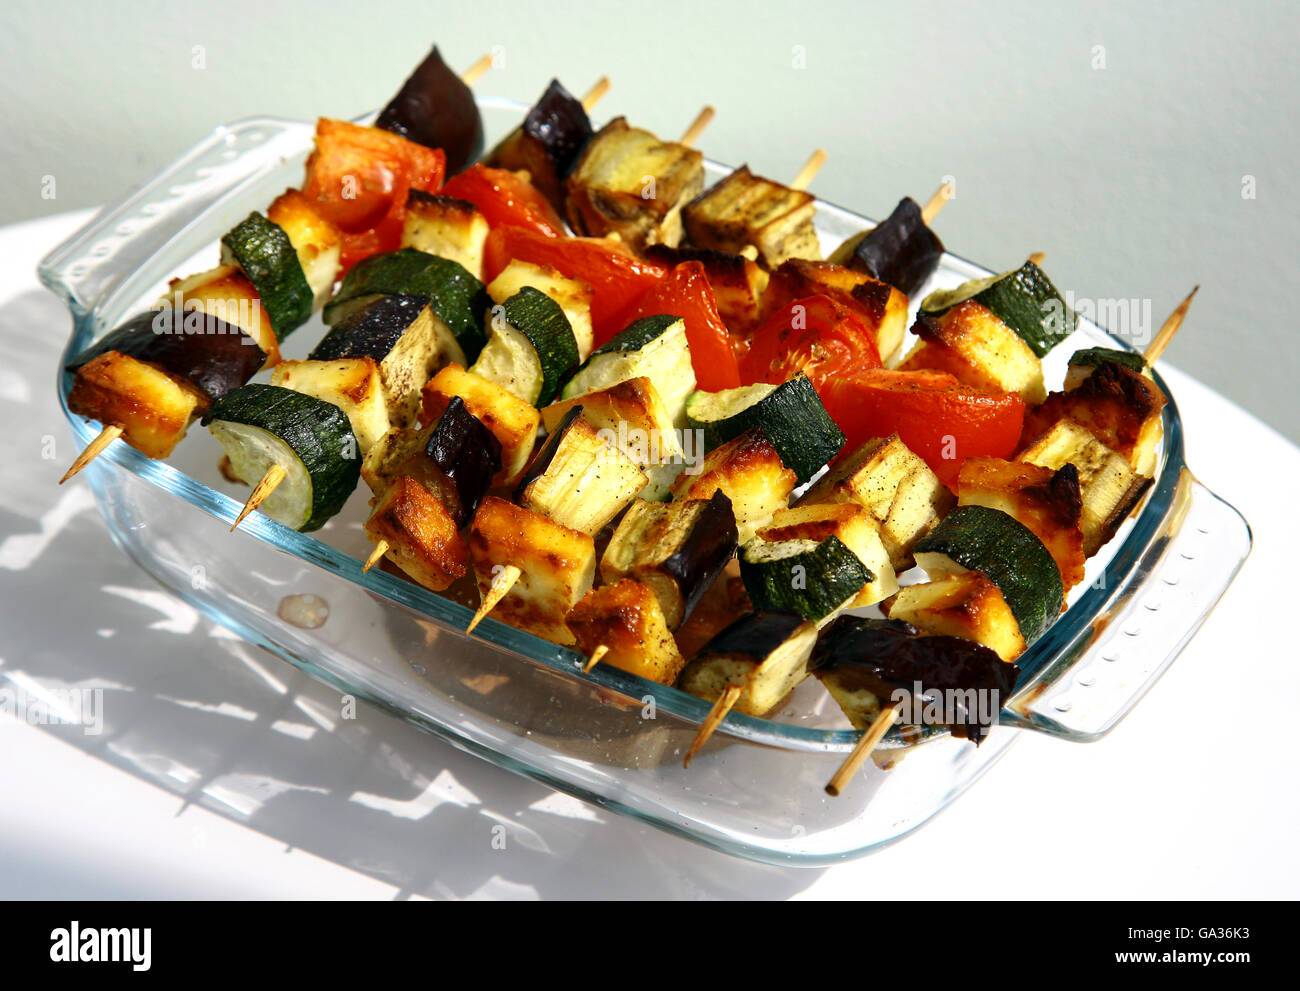 Grilled vegetables on wooden skewers Stock Photo